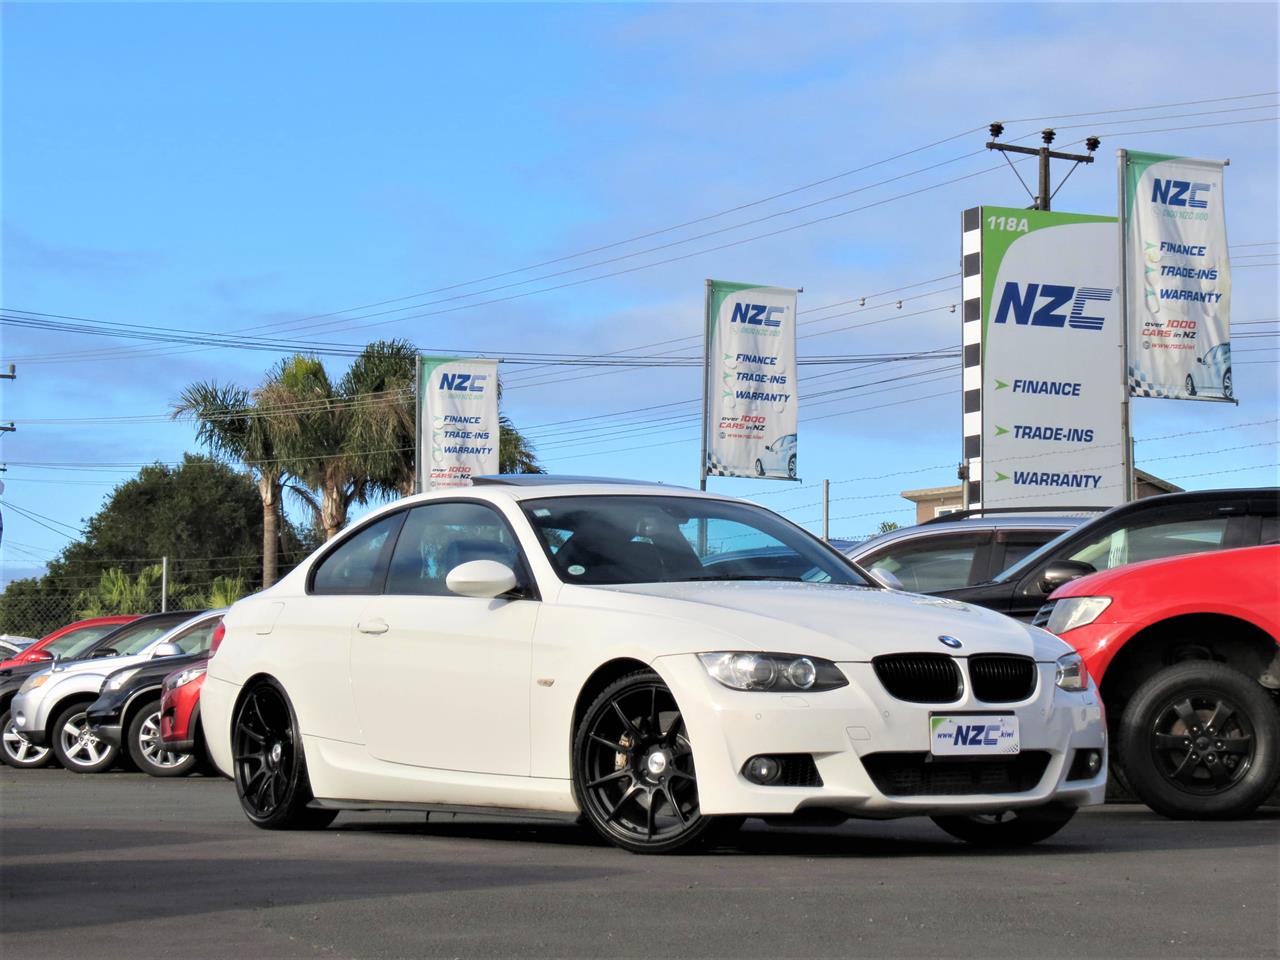 NZC best hot price for 2008 BMW 335i in Auckland